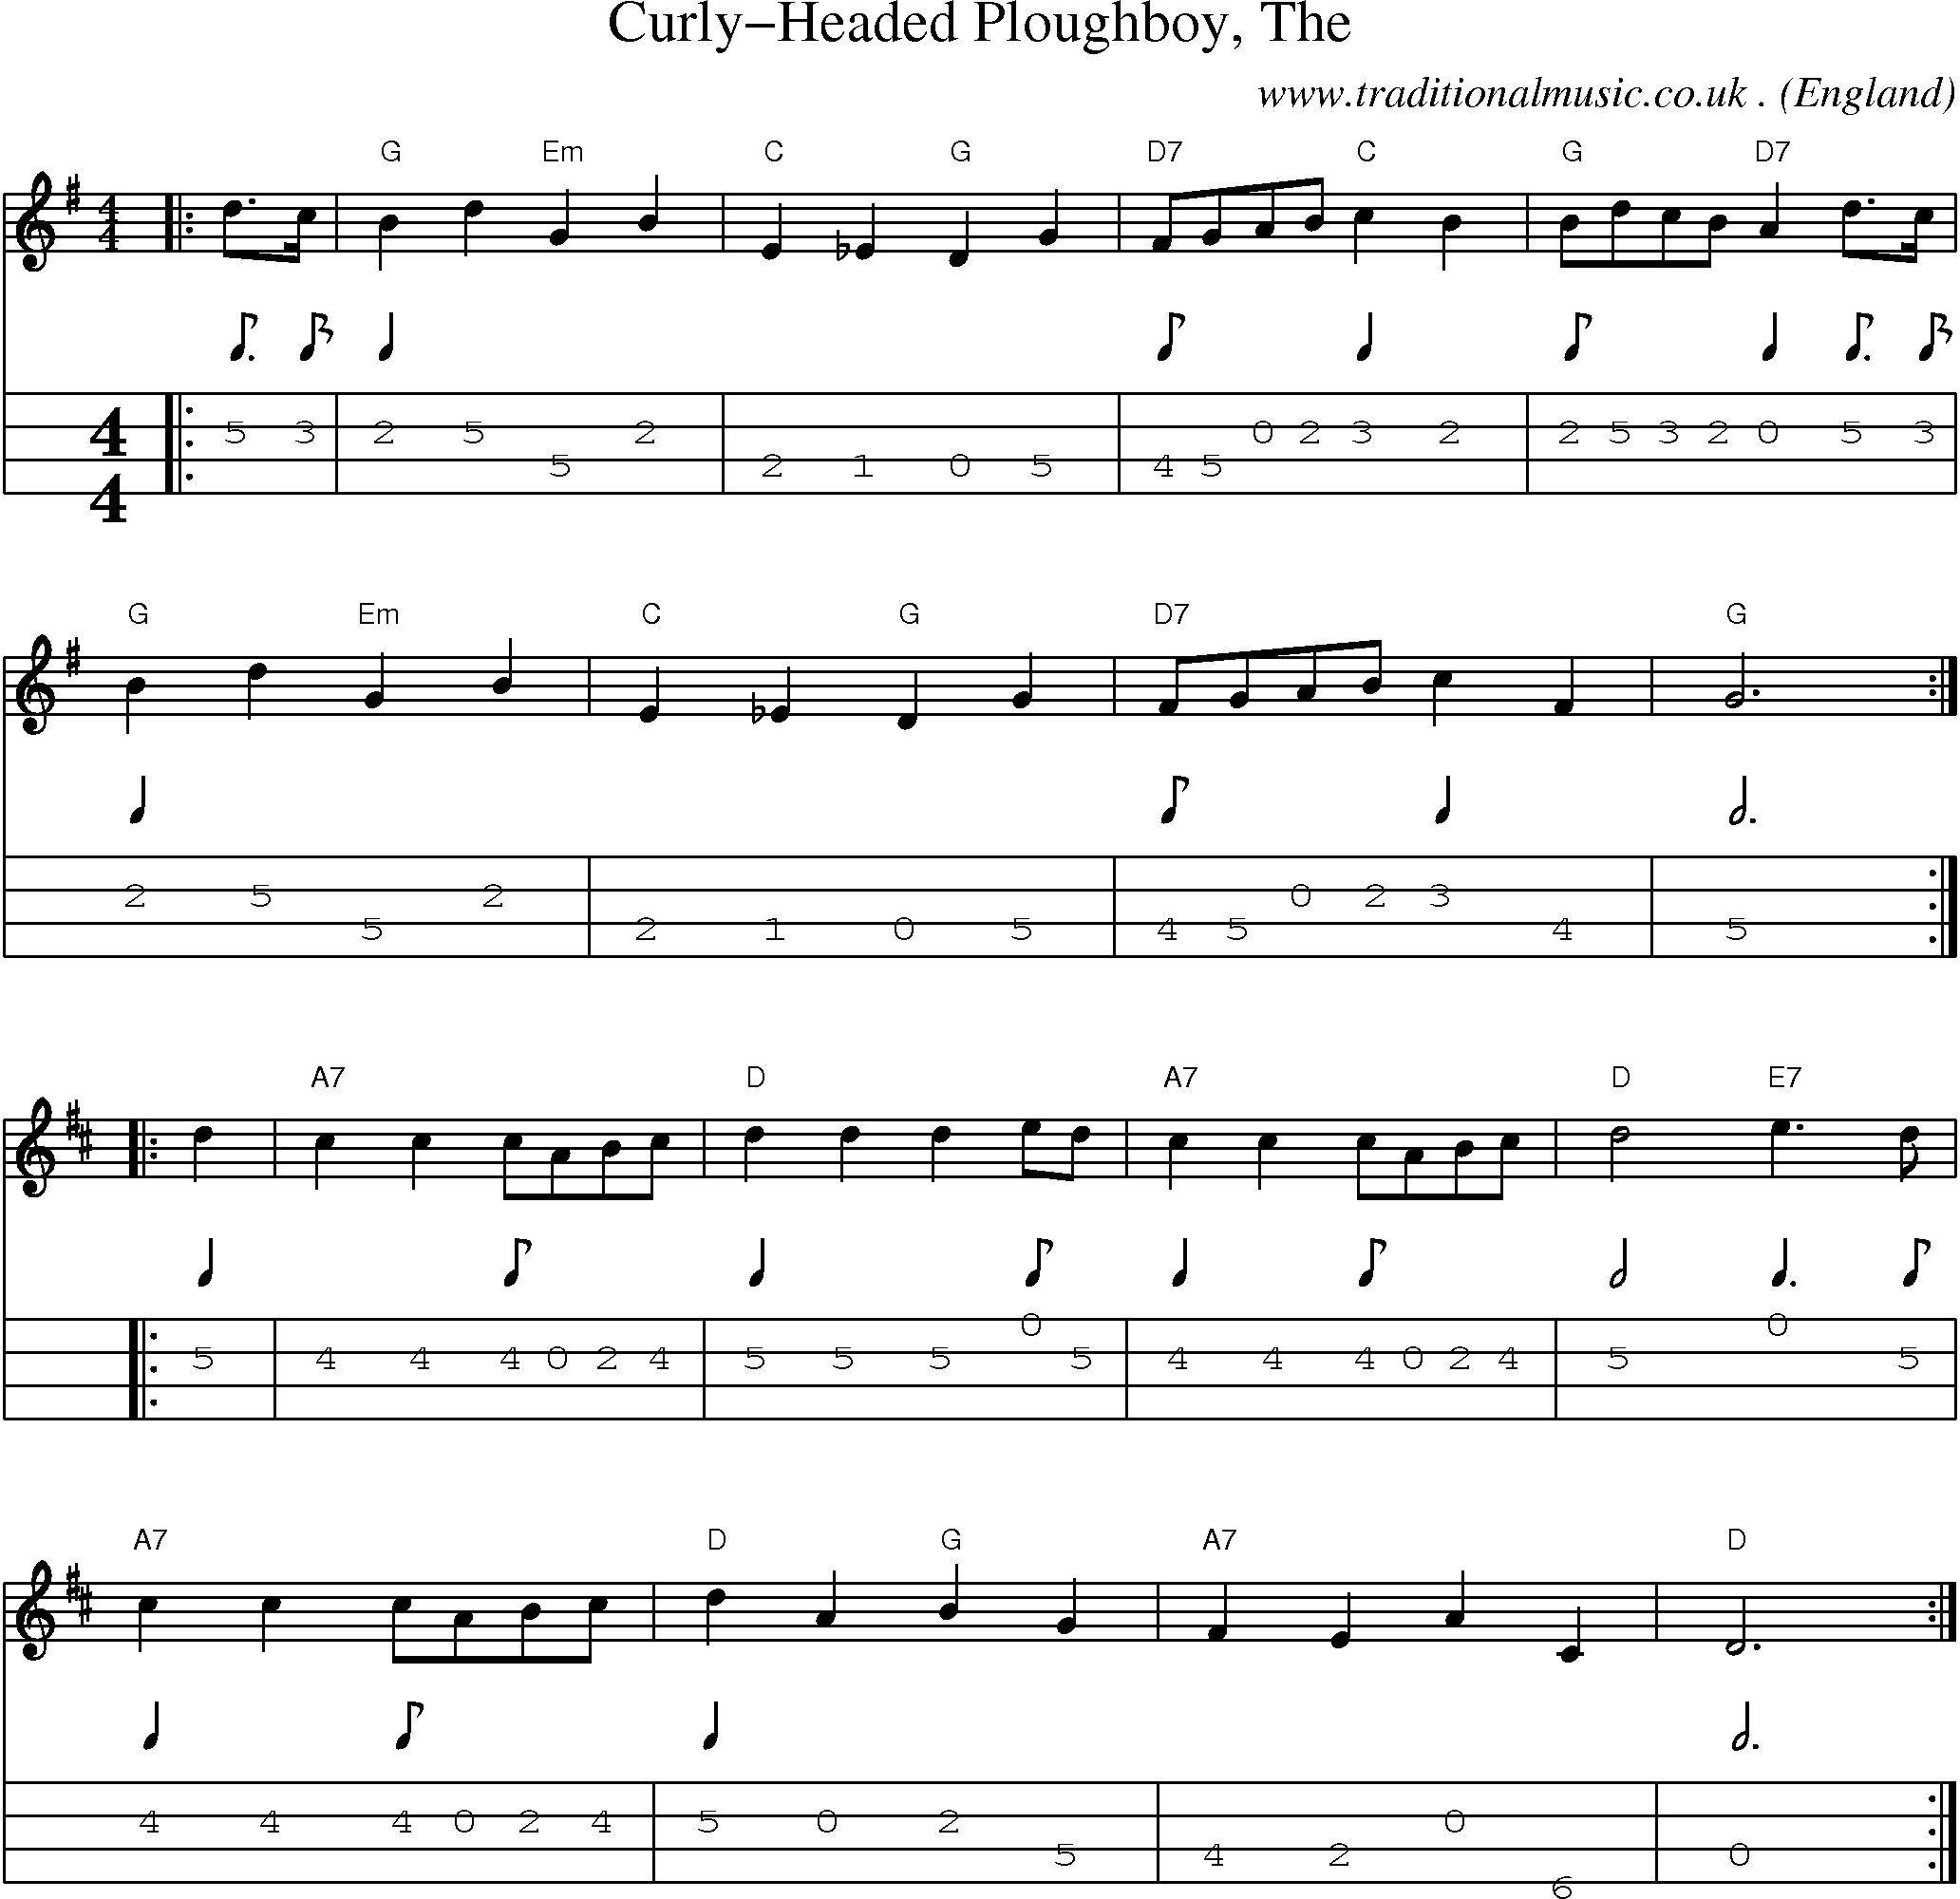 Music Score and Guitar Tabs for Curly-headed Ploughboy The